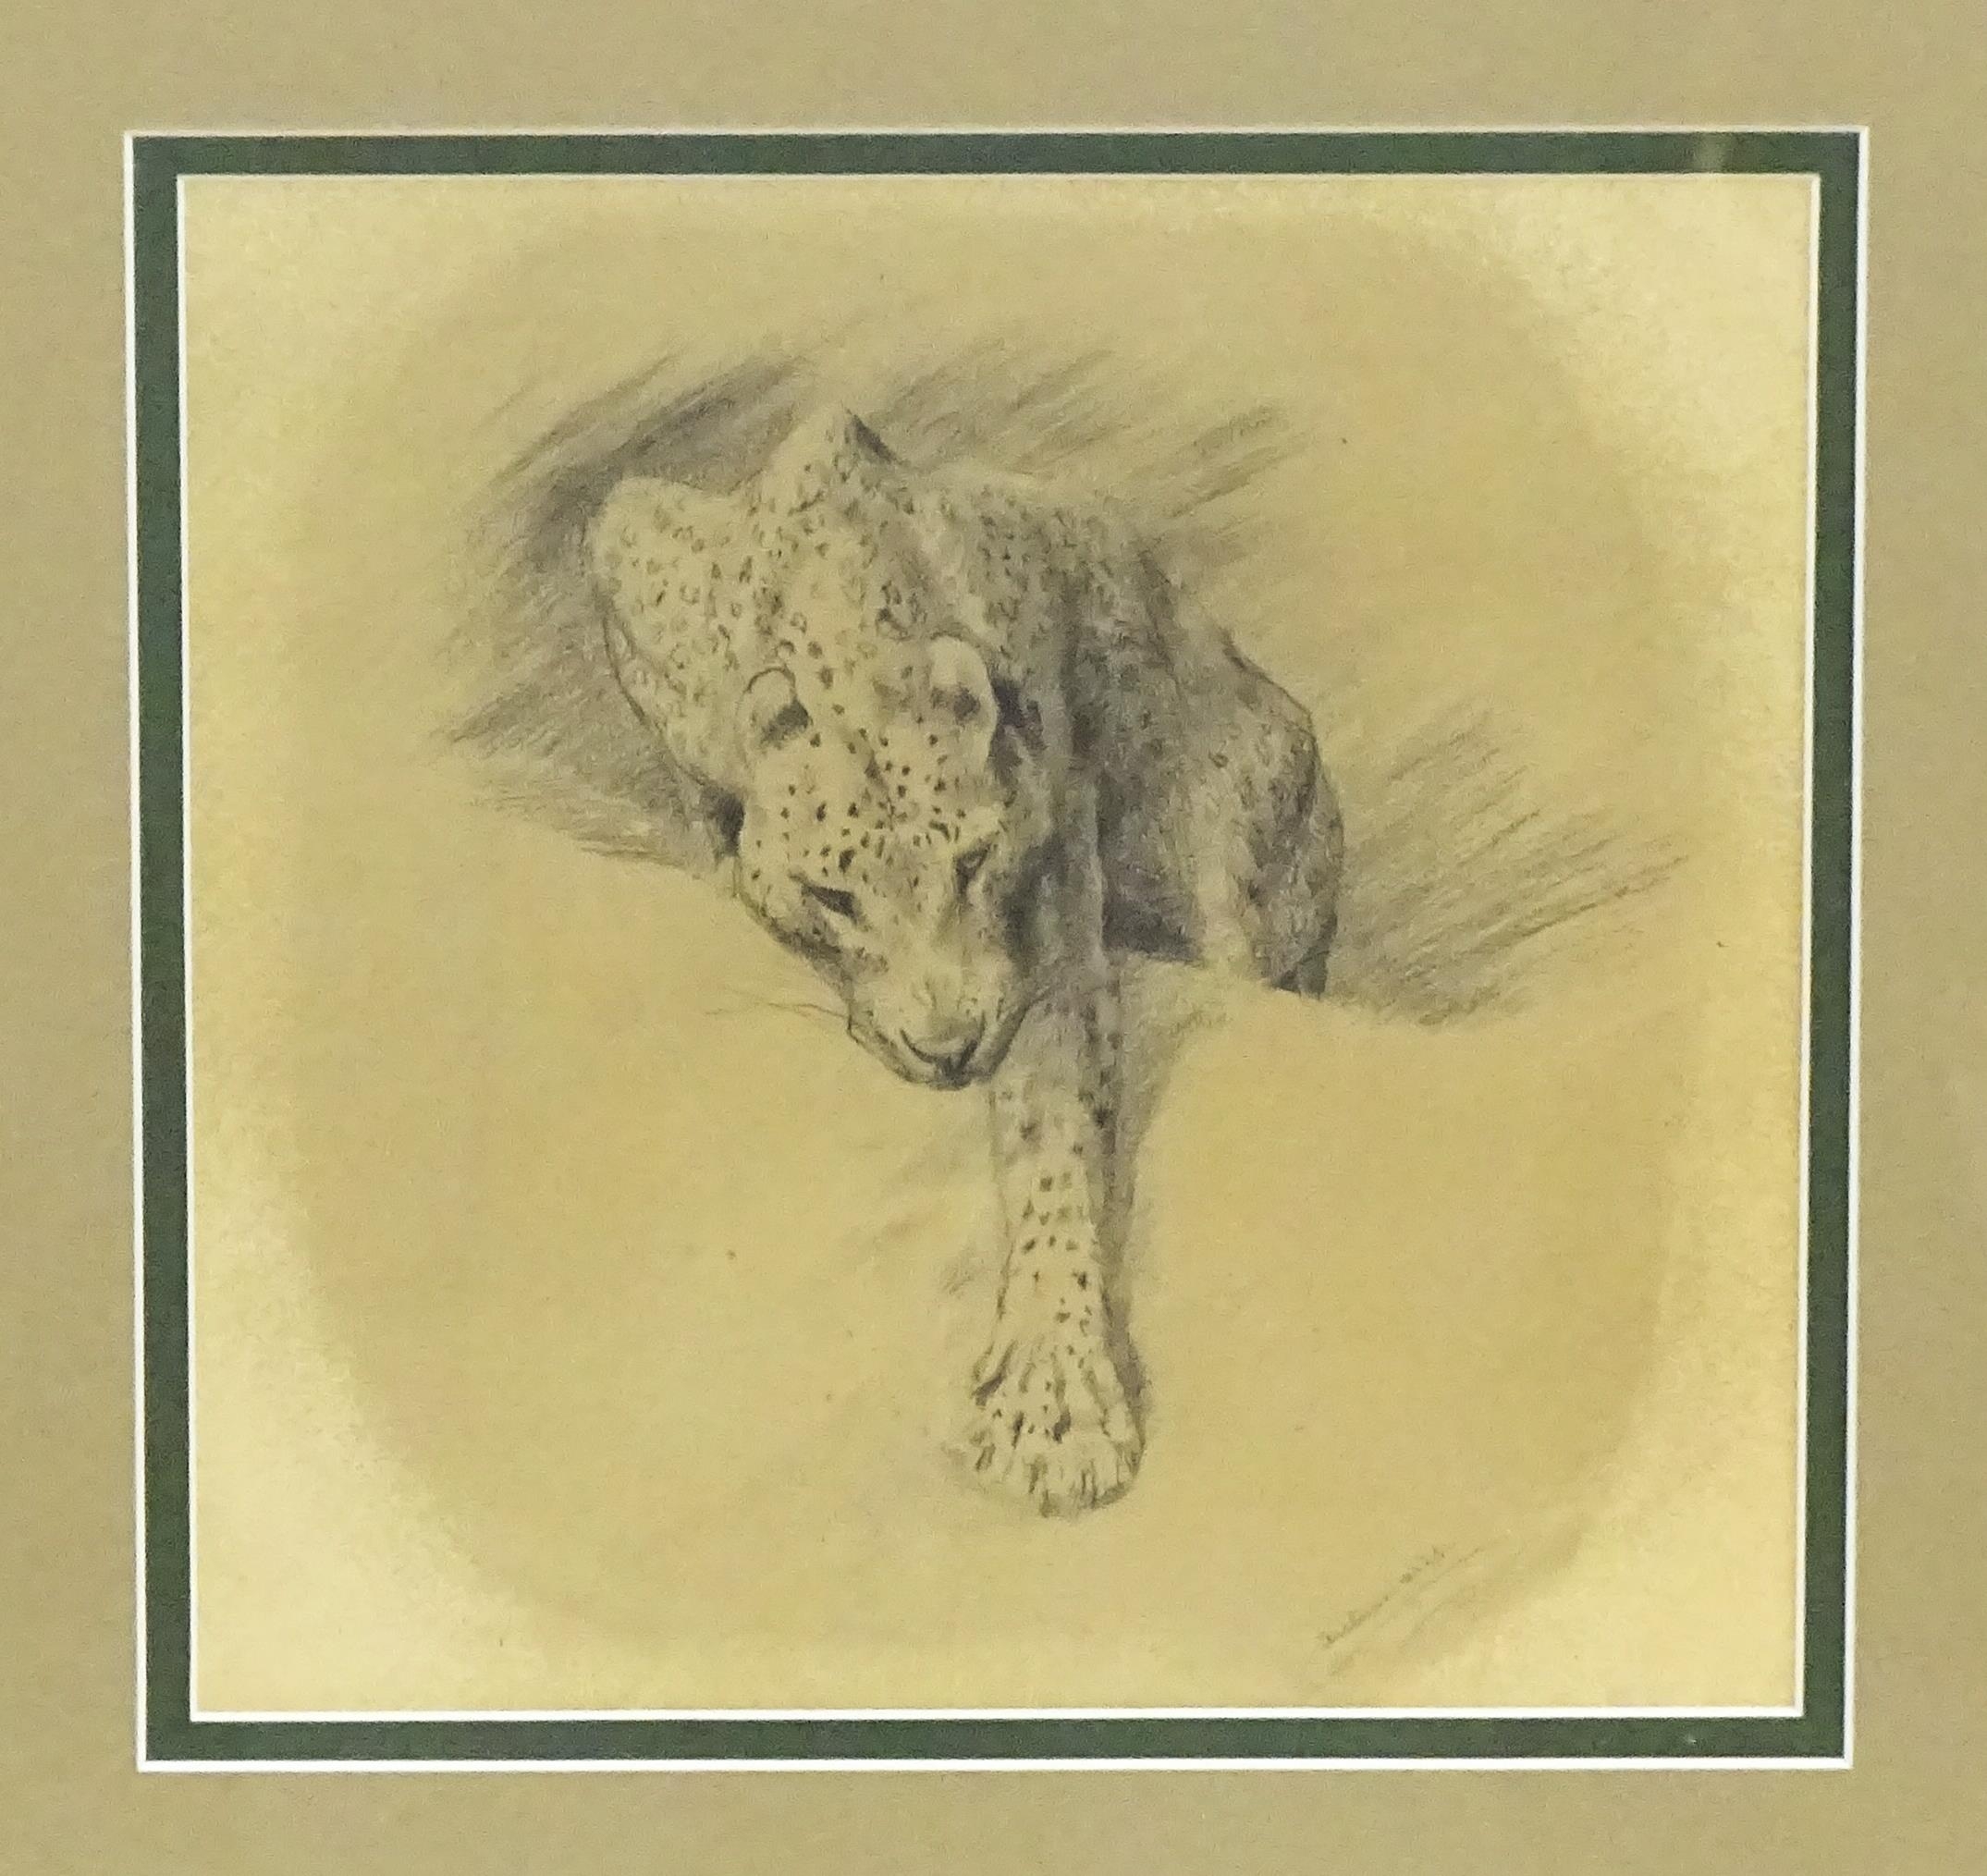 Arthur Wardle (1864-1949), Pencil sketch, A study of a leopard. Signed lower right. Approx. 8" x - Image 3 of 4